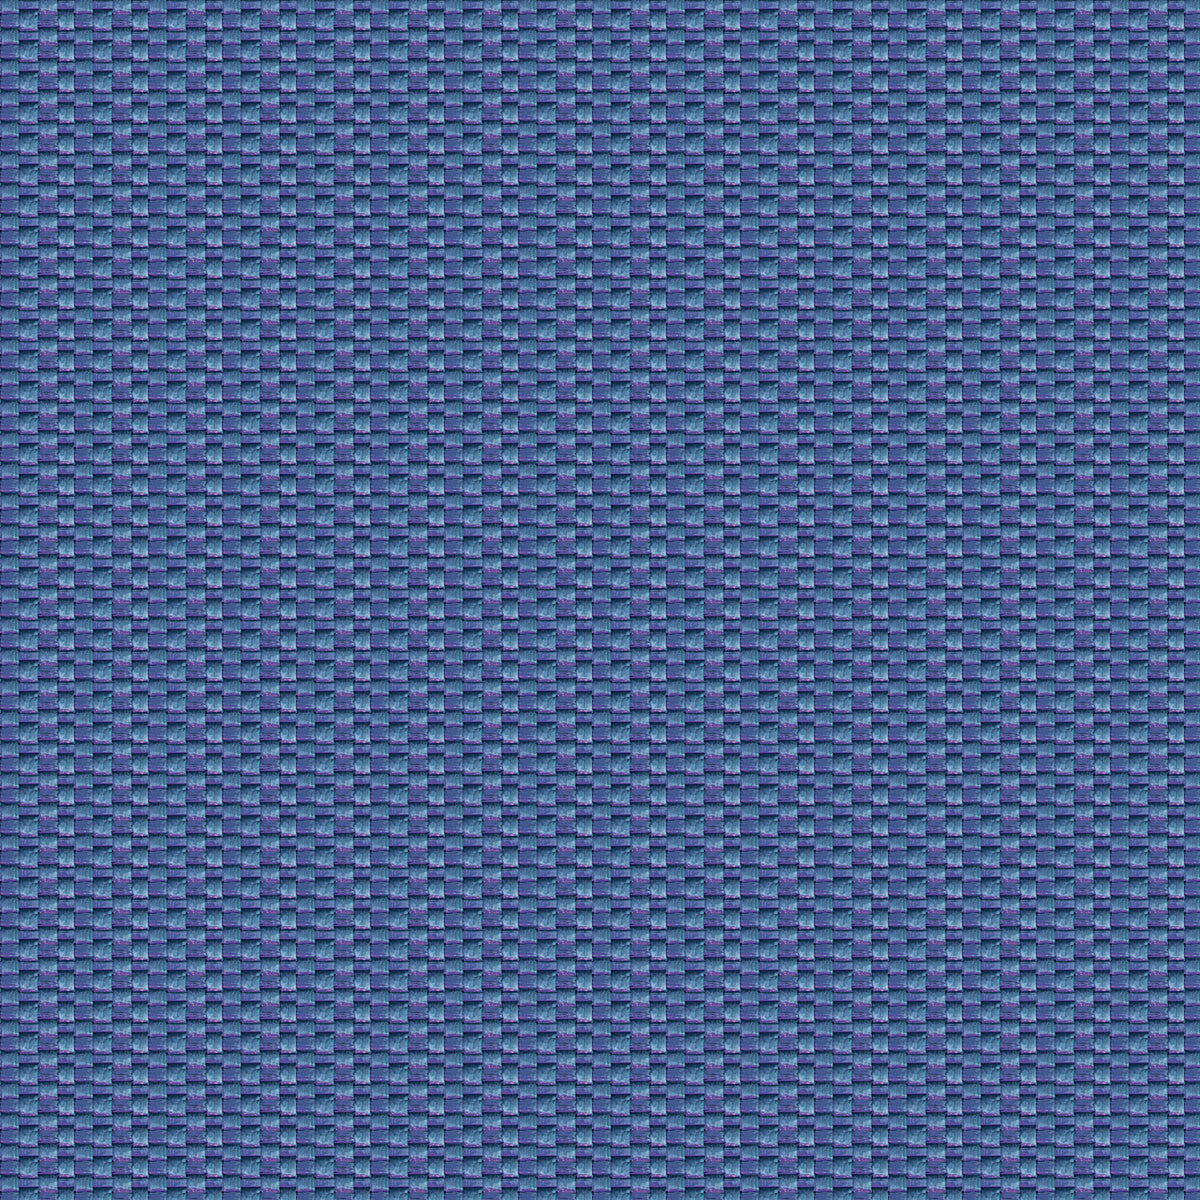 Isamu fabric in azul oscuro color - pattern GDT5637.009.0 - by Gaston y Daniela in the Gaston Japon collection